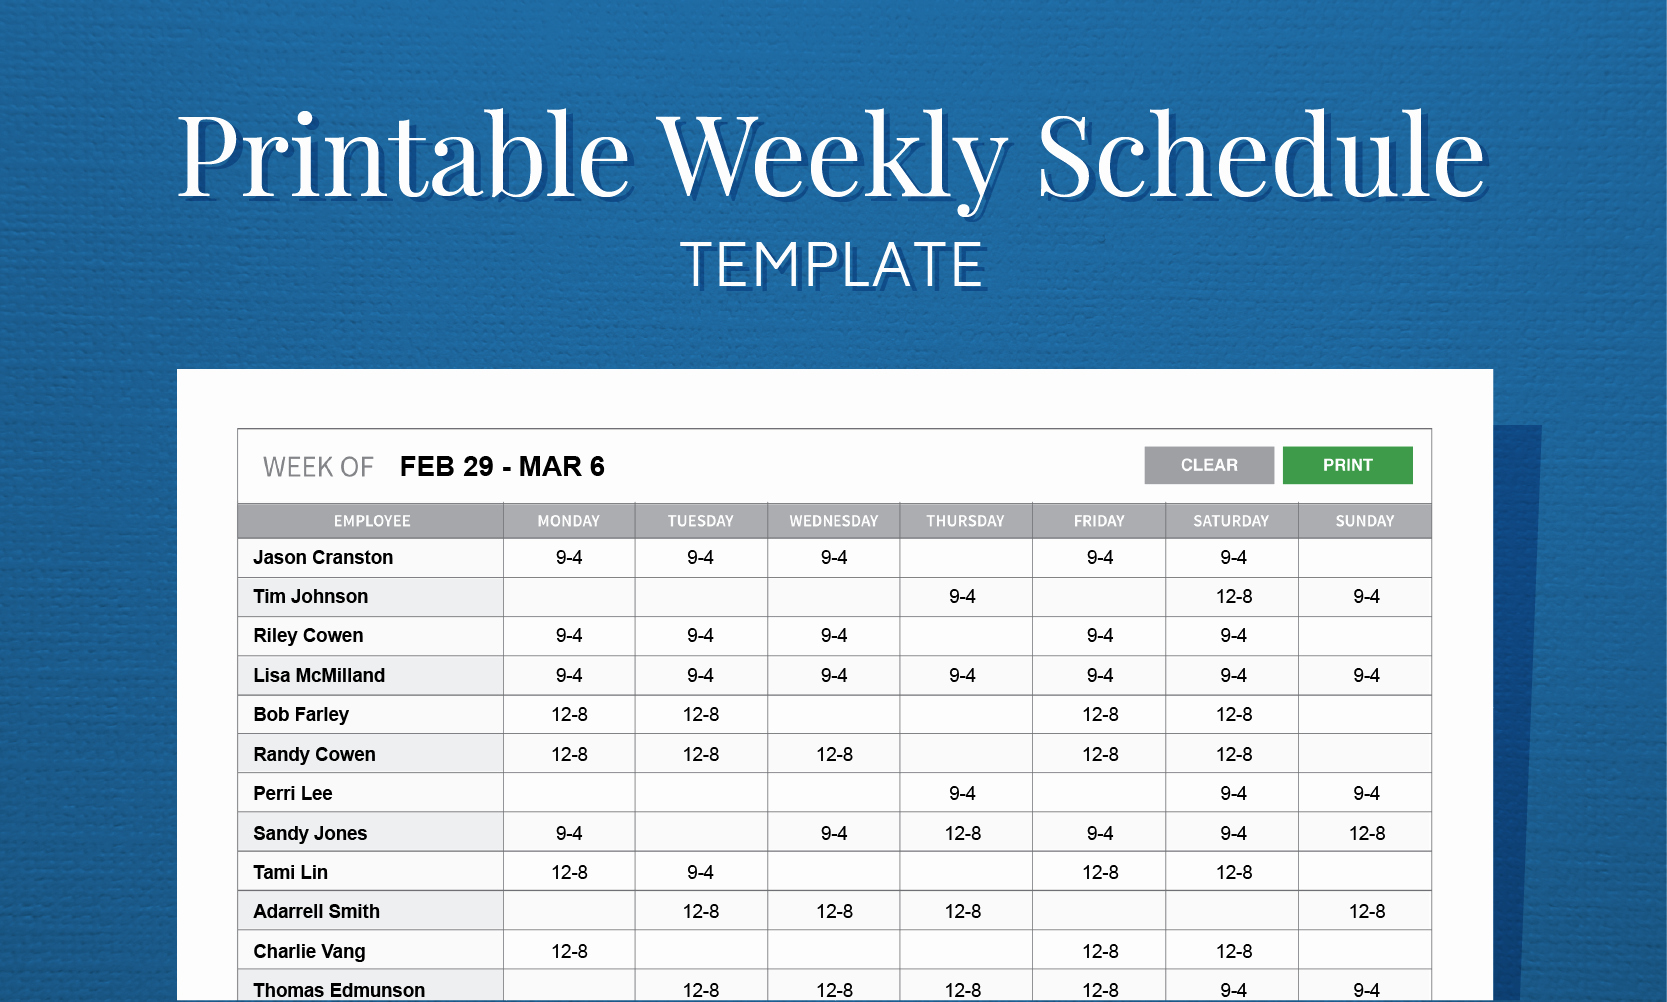 Free Printable Weekly Work Schedule Template for Employee